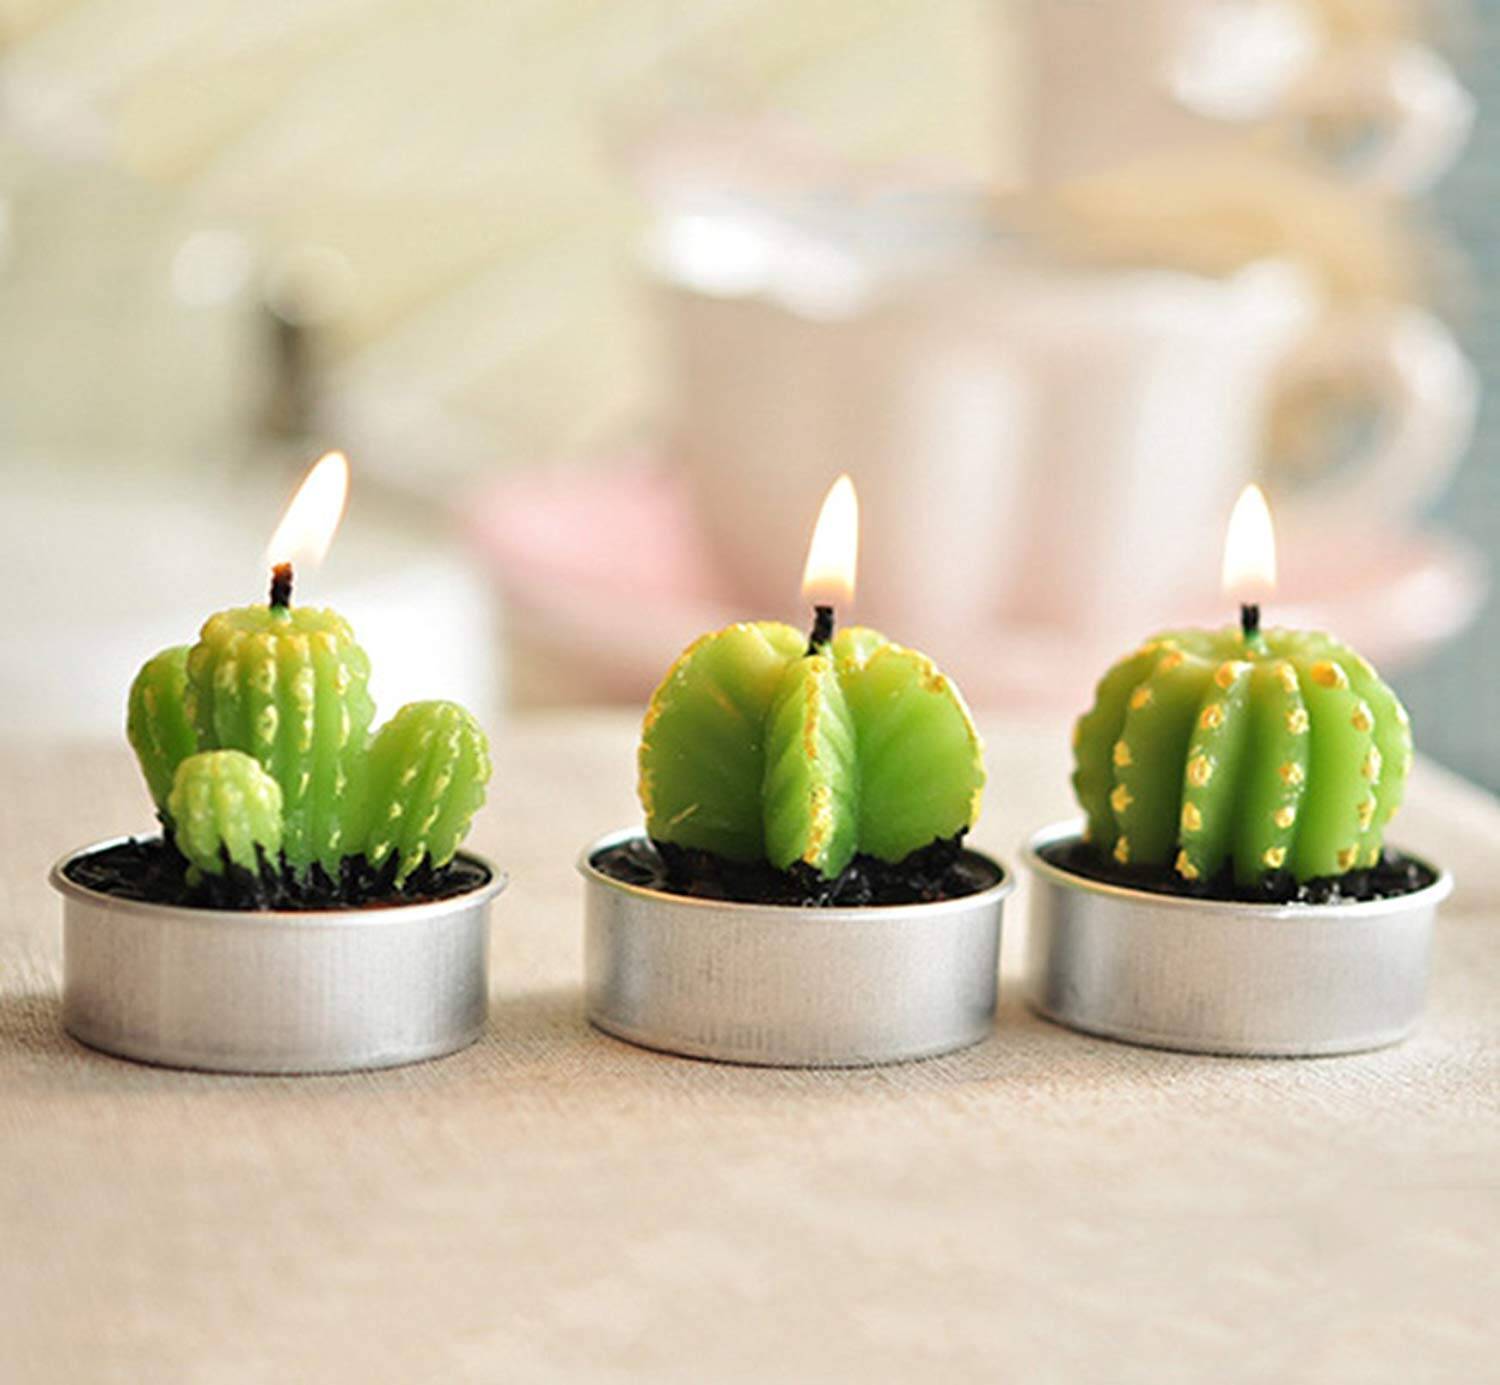 Cactus Candles - //coolthings.us